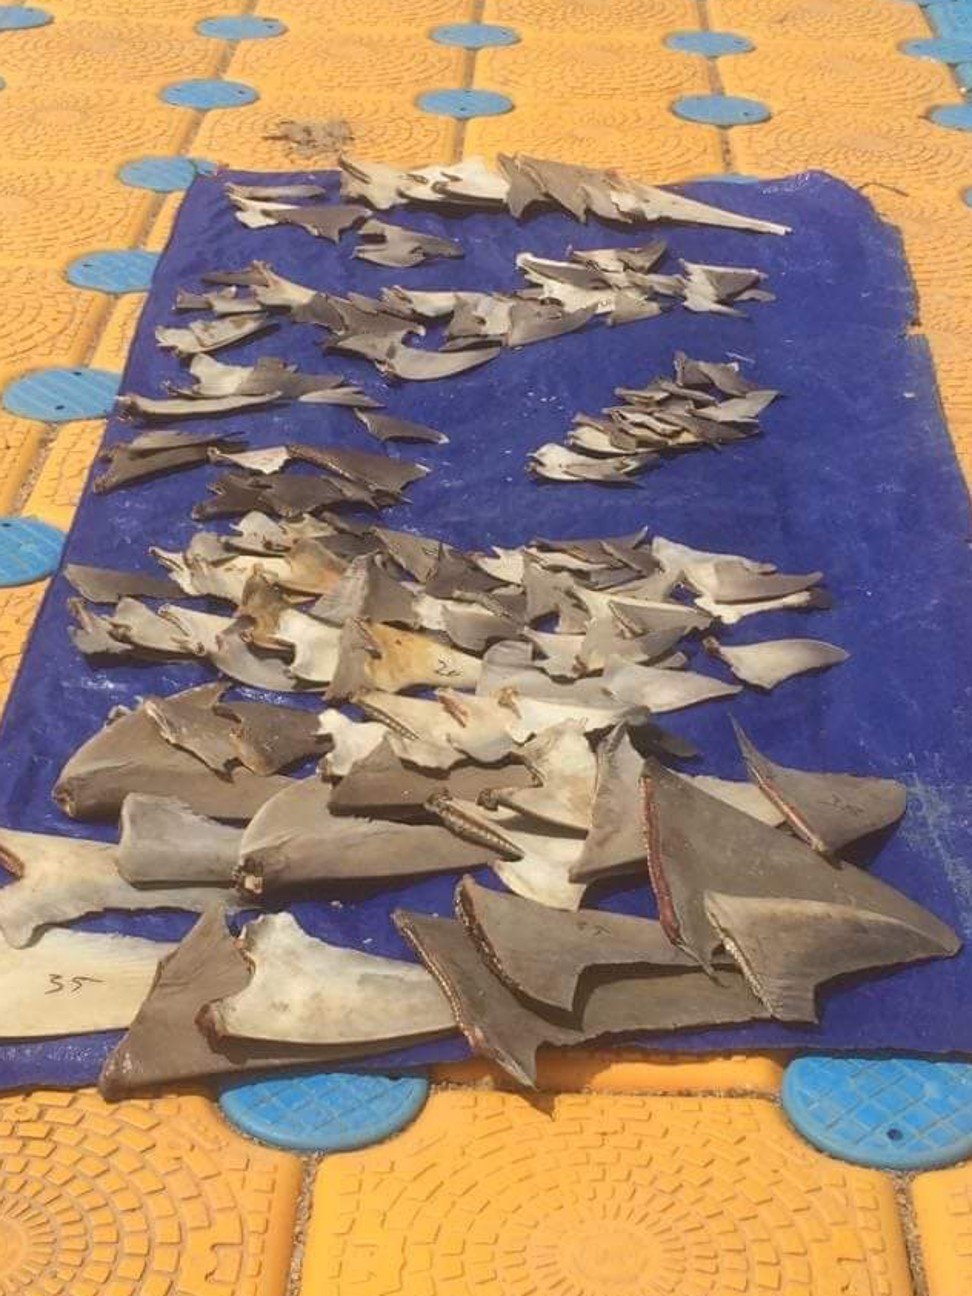 Shark fins on display at a market in Labuan Bajo, Indonesia. Photo: Mario Schmiedl